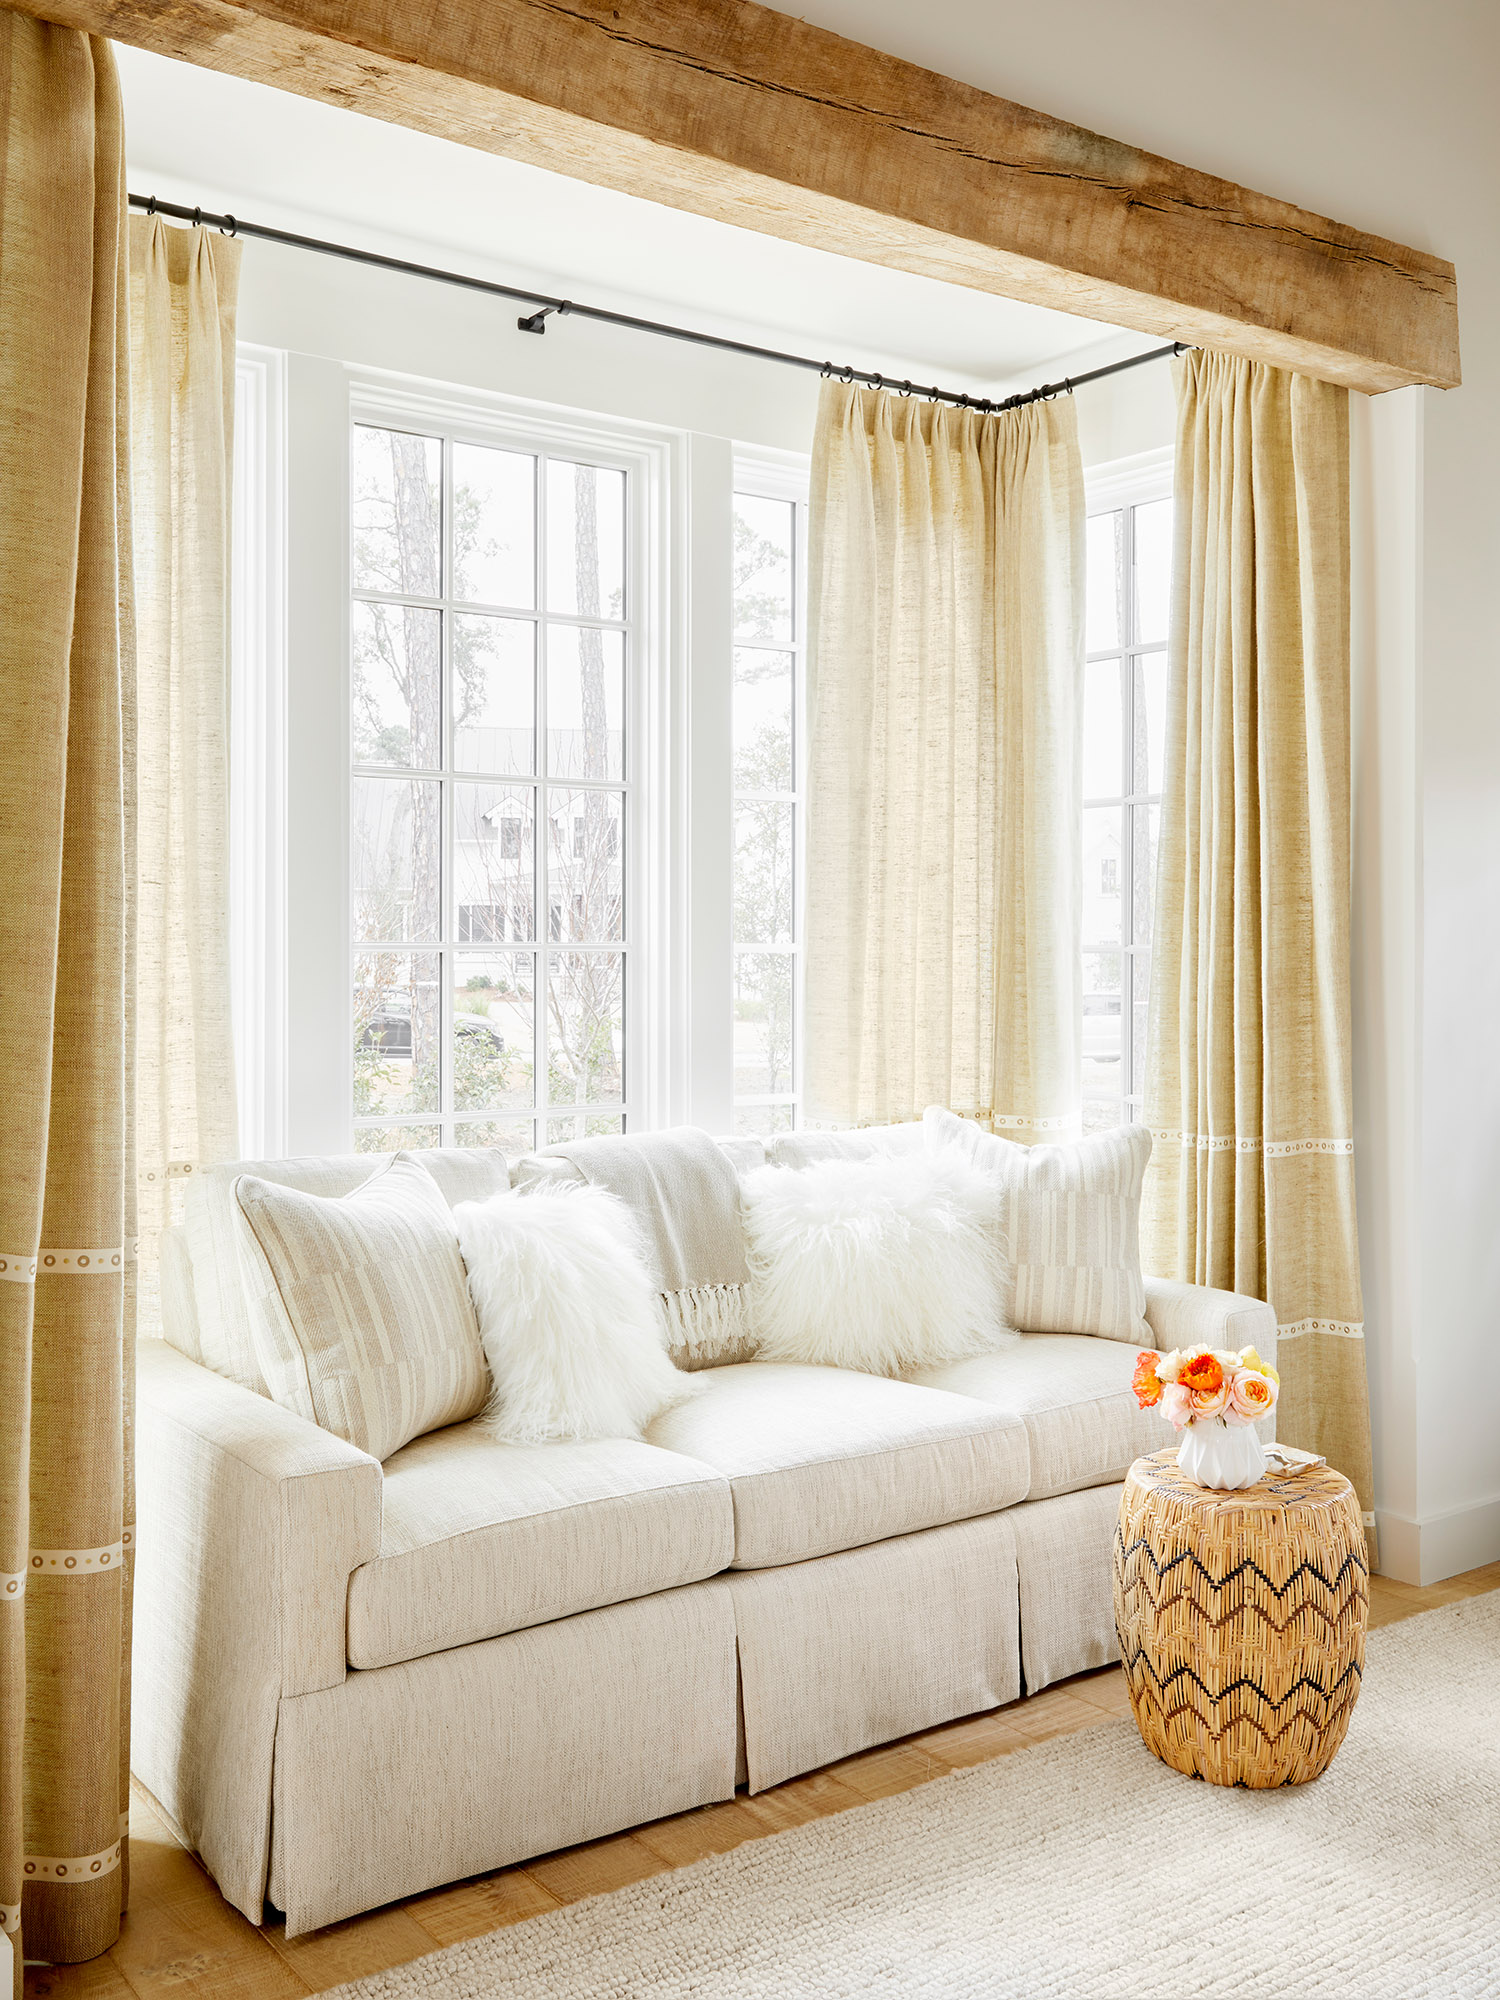 Antique timber framed bay window with white sofa, Phoebe Howard's Snug sofa from Sherrill Furniture